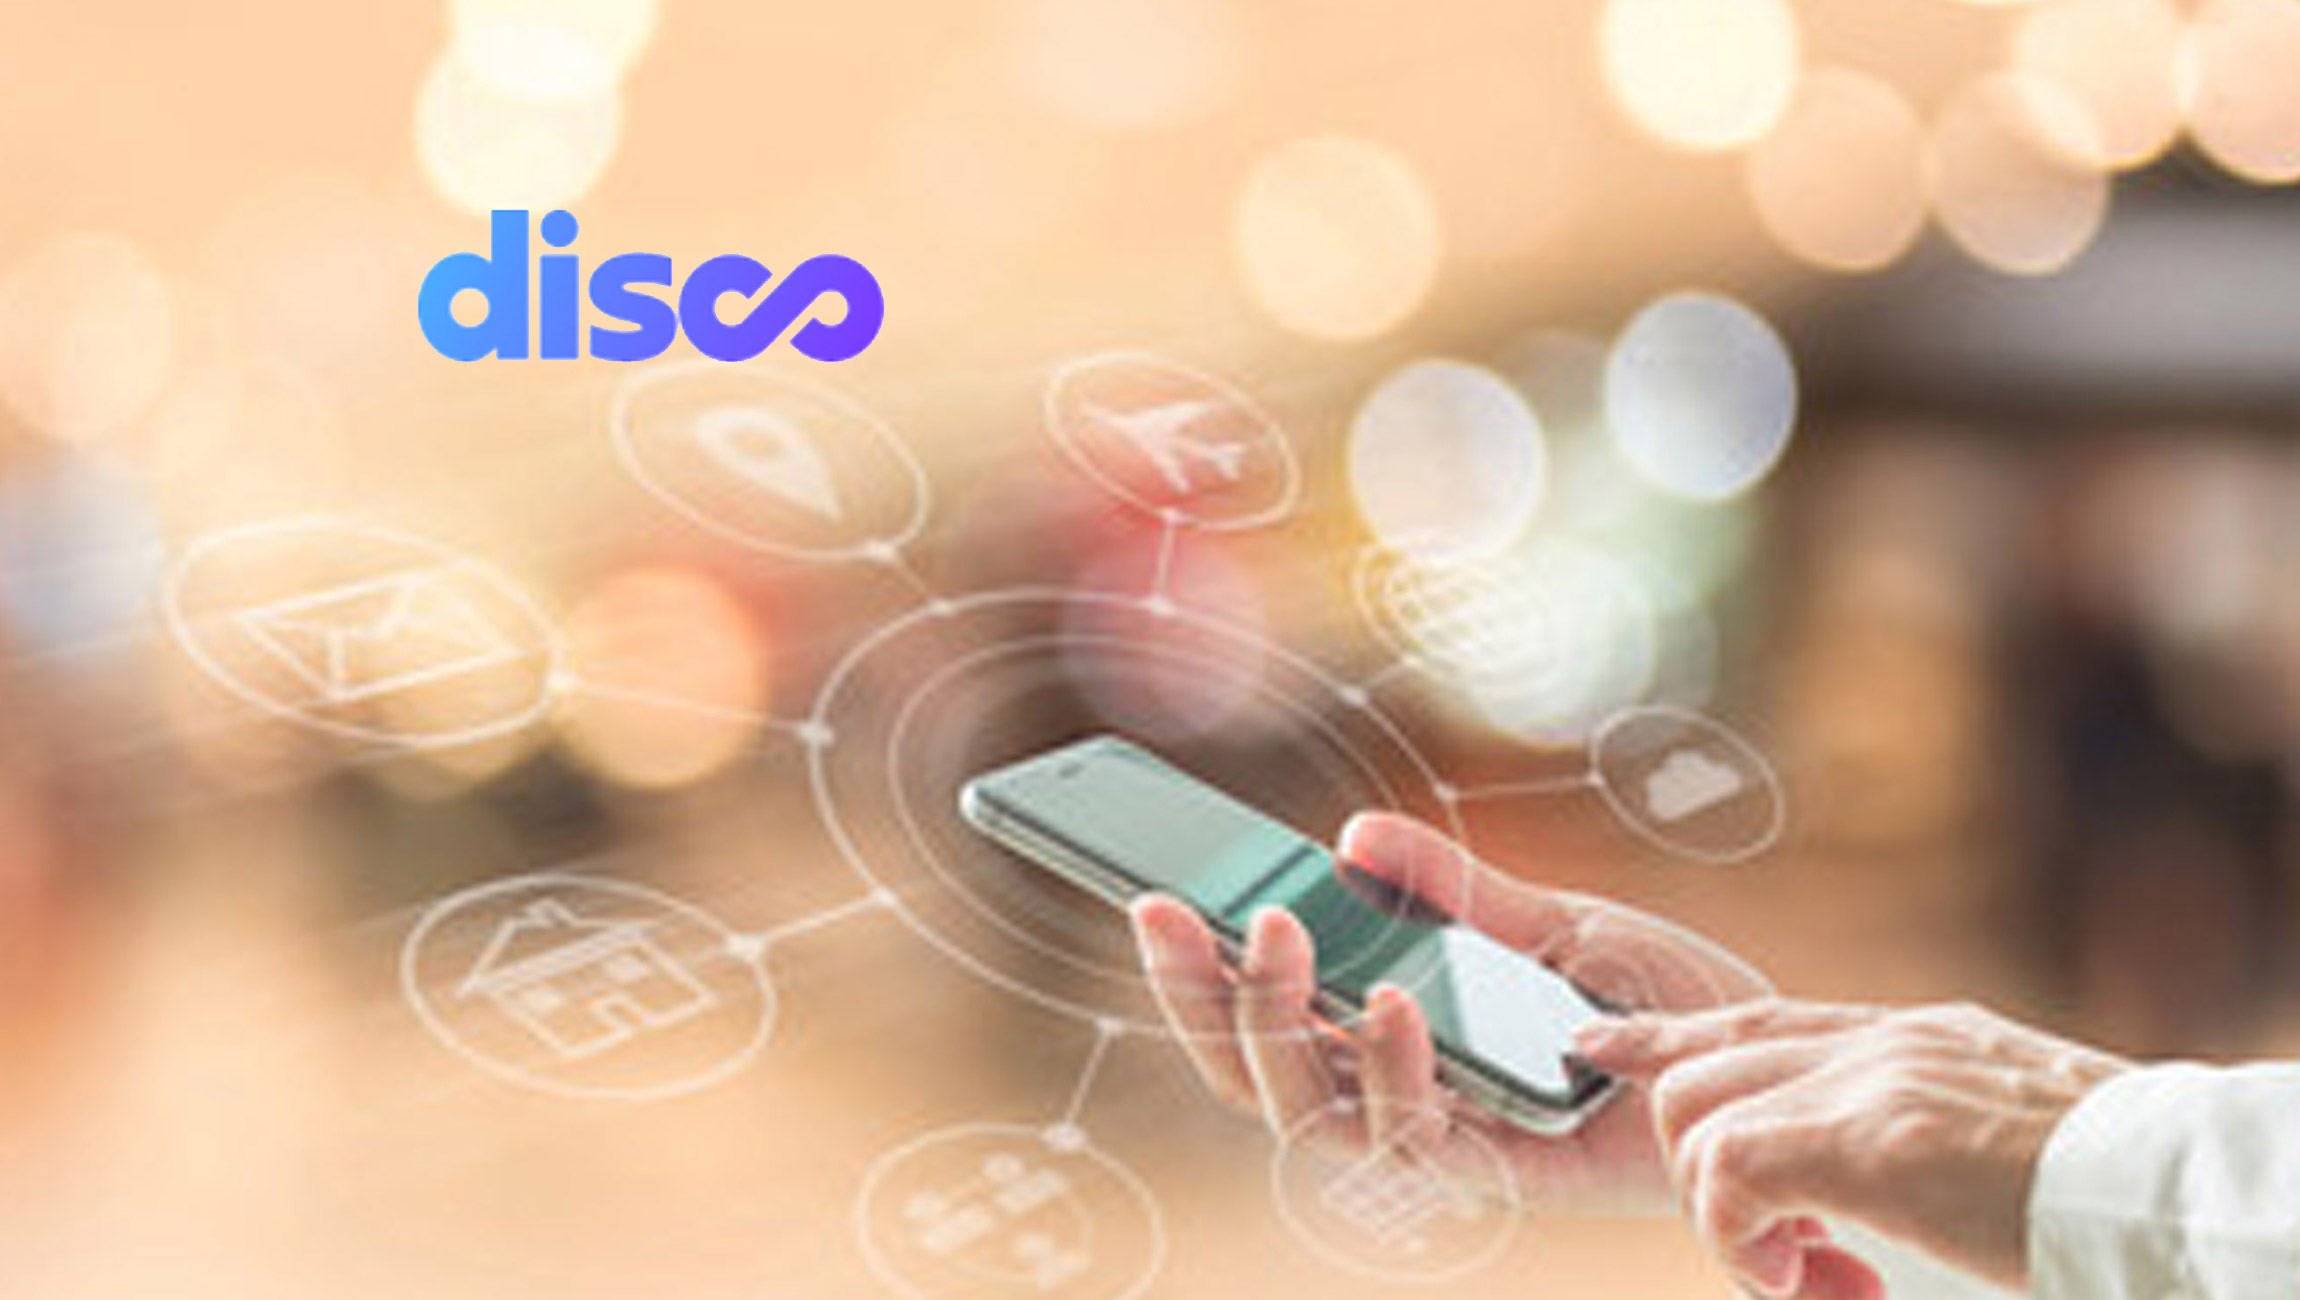 Disco-Raises-_20M-Series-A-led-by-Felicis-Ventures-to-Unify-the-Next-Generation-of-Online-Merchants